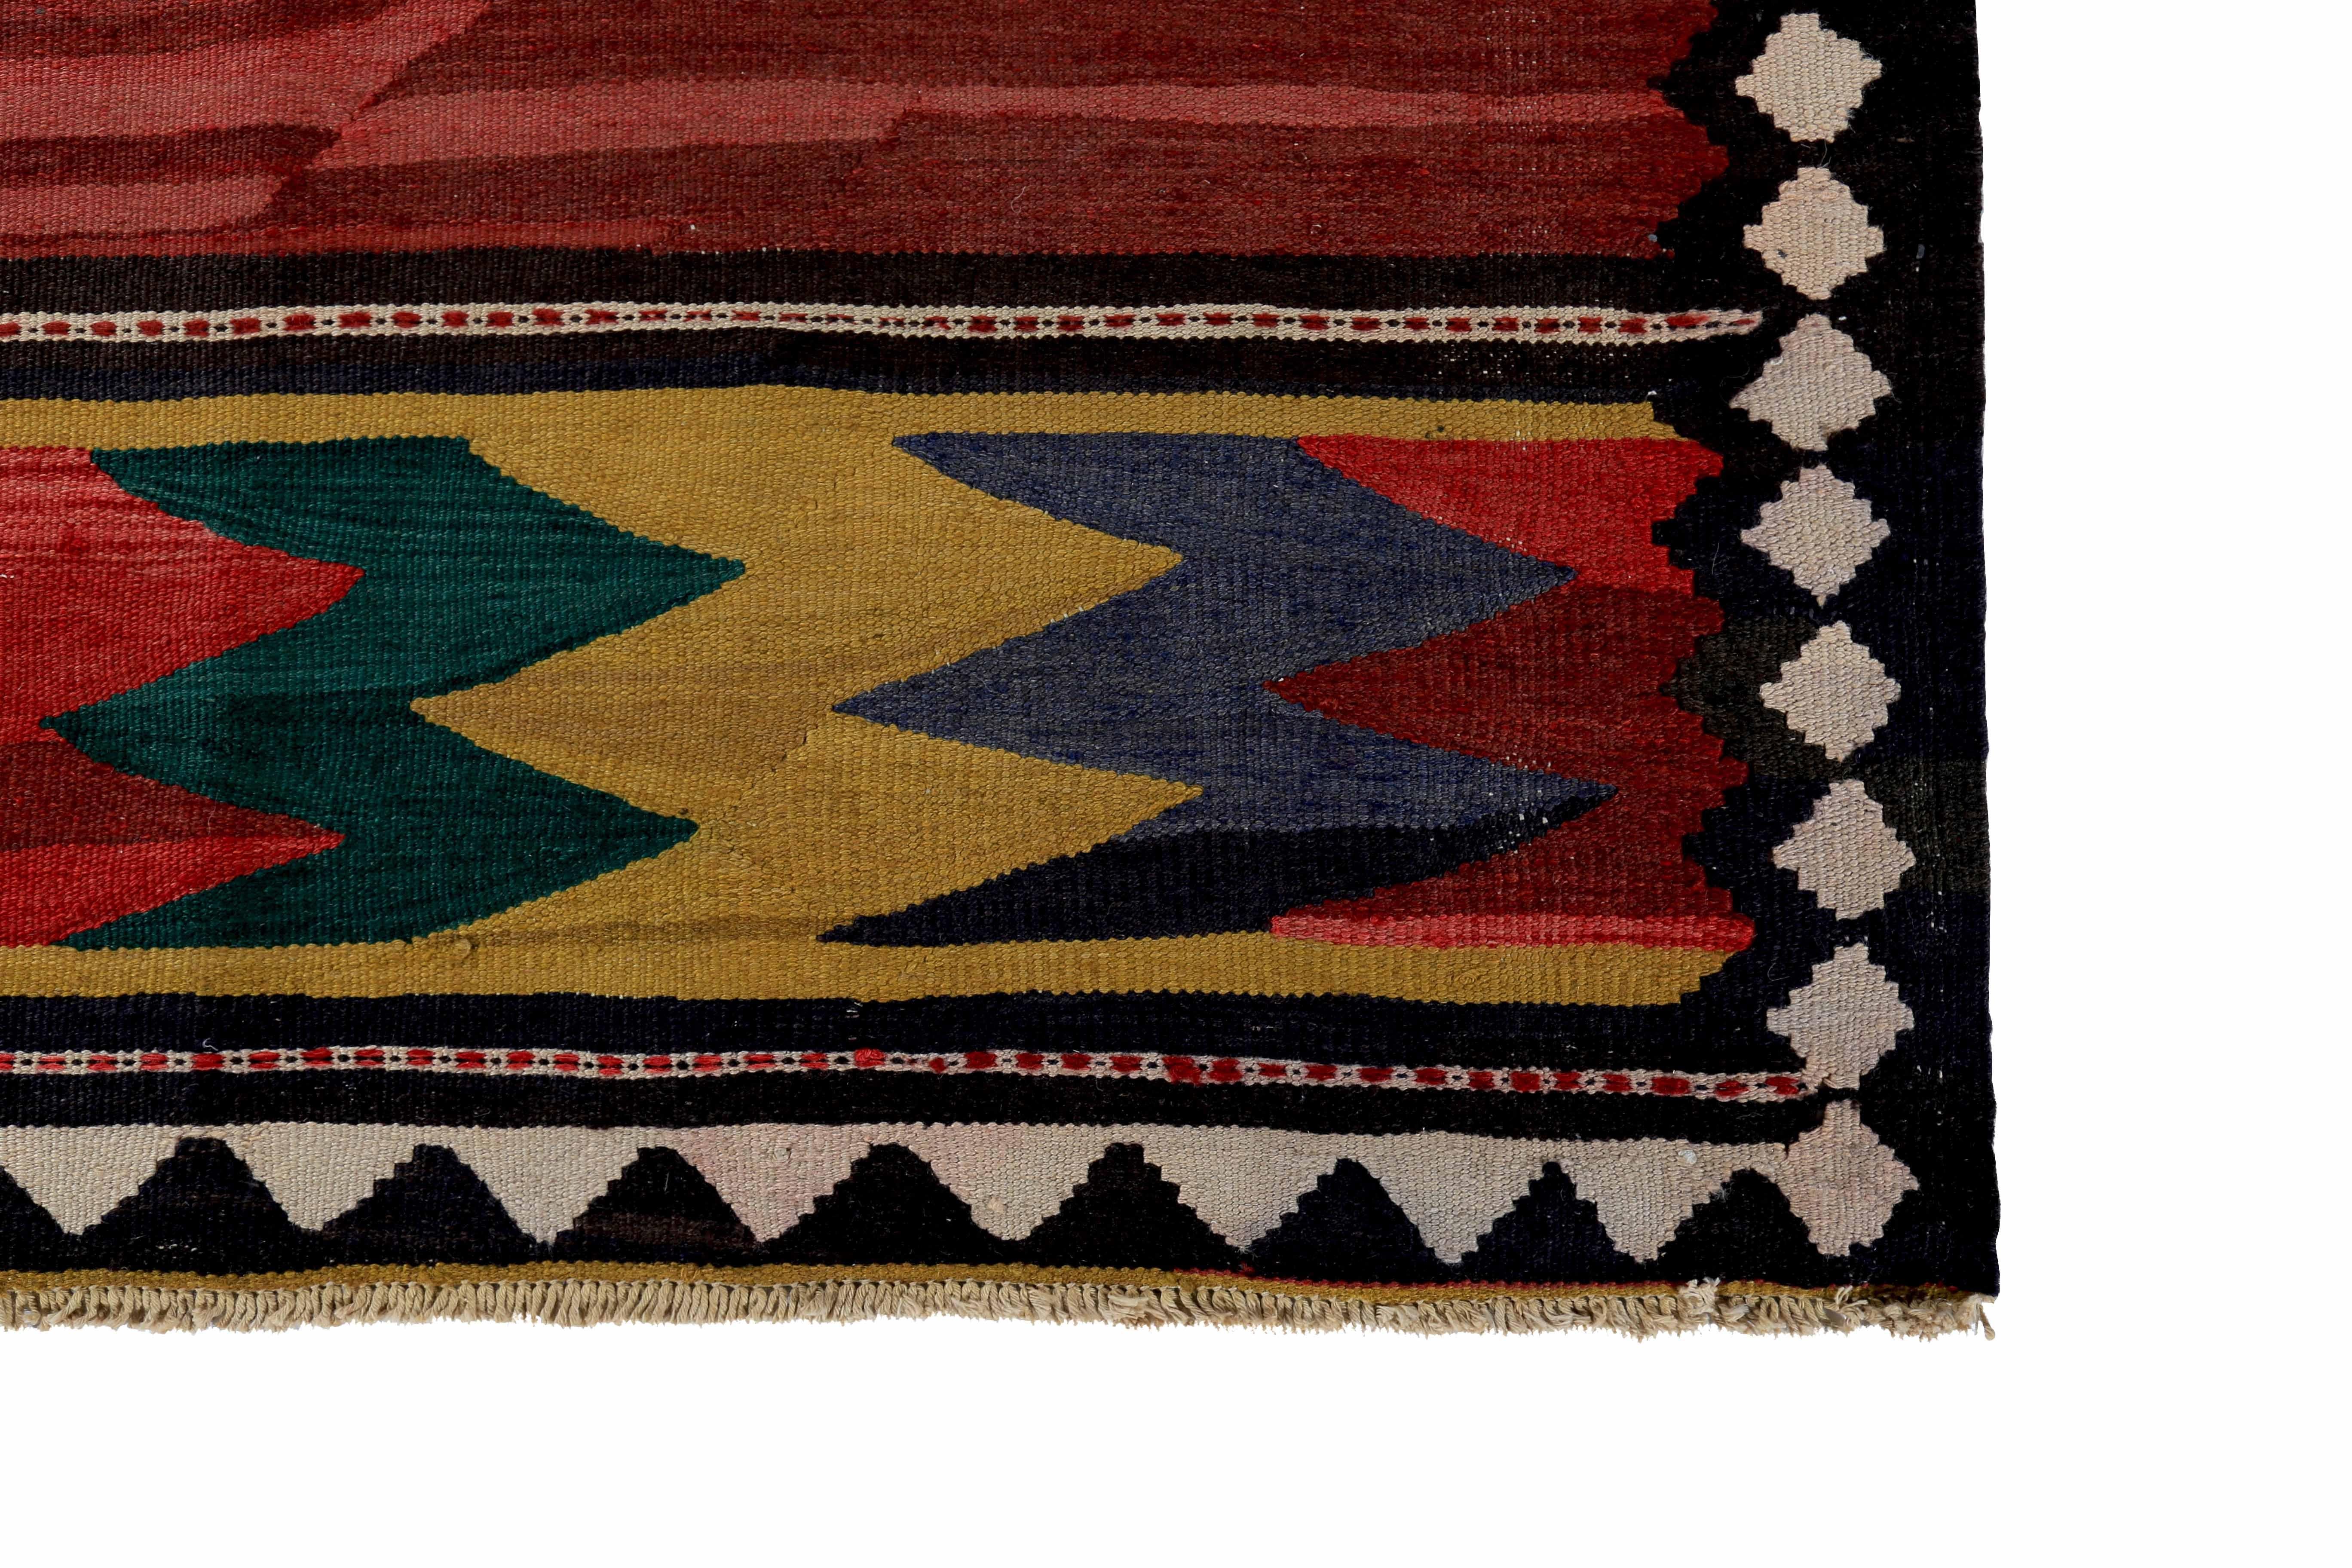 Modern Turkish Kilim Runner Rug with Red and Green Tribal Patterns In New Condition For Sale In Dallas, TX